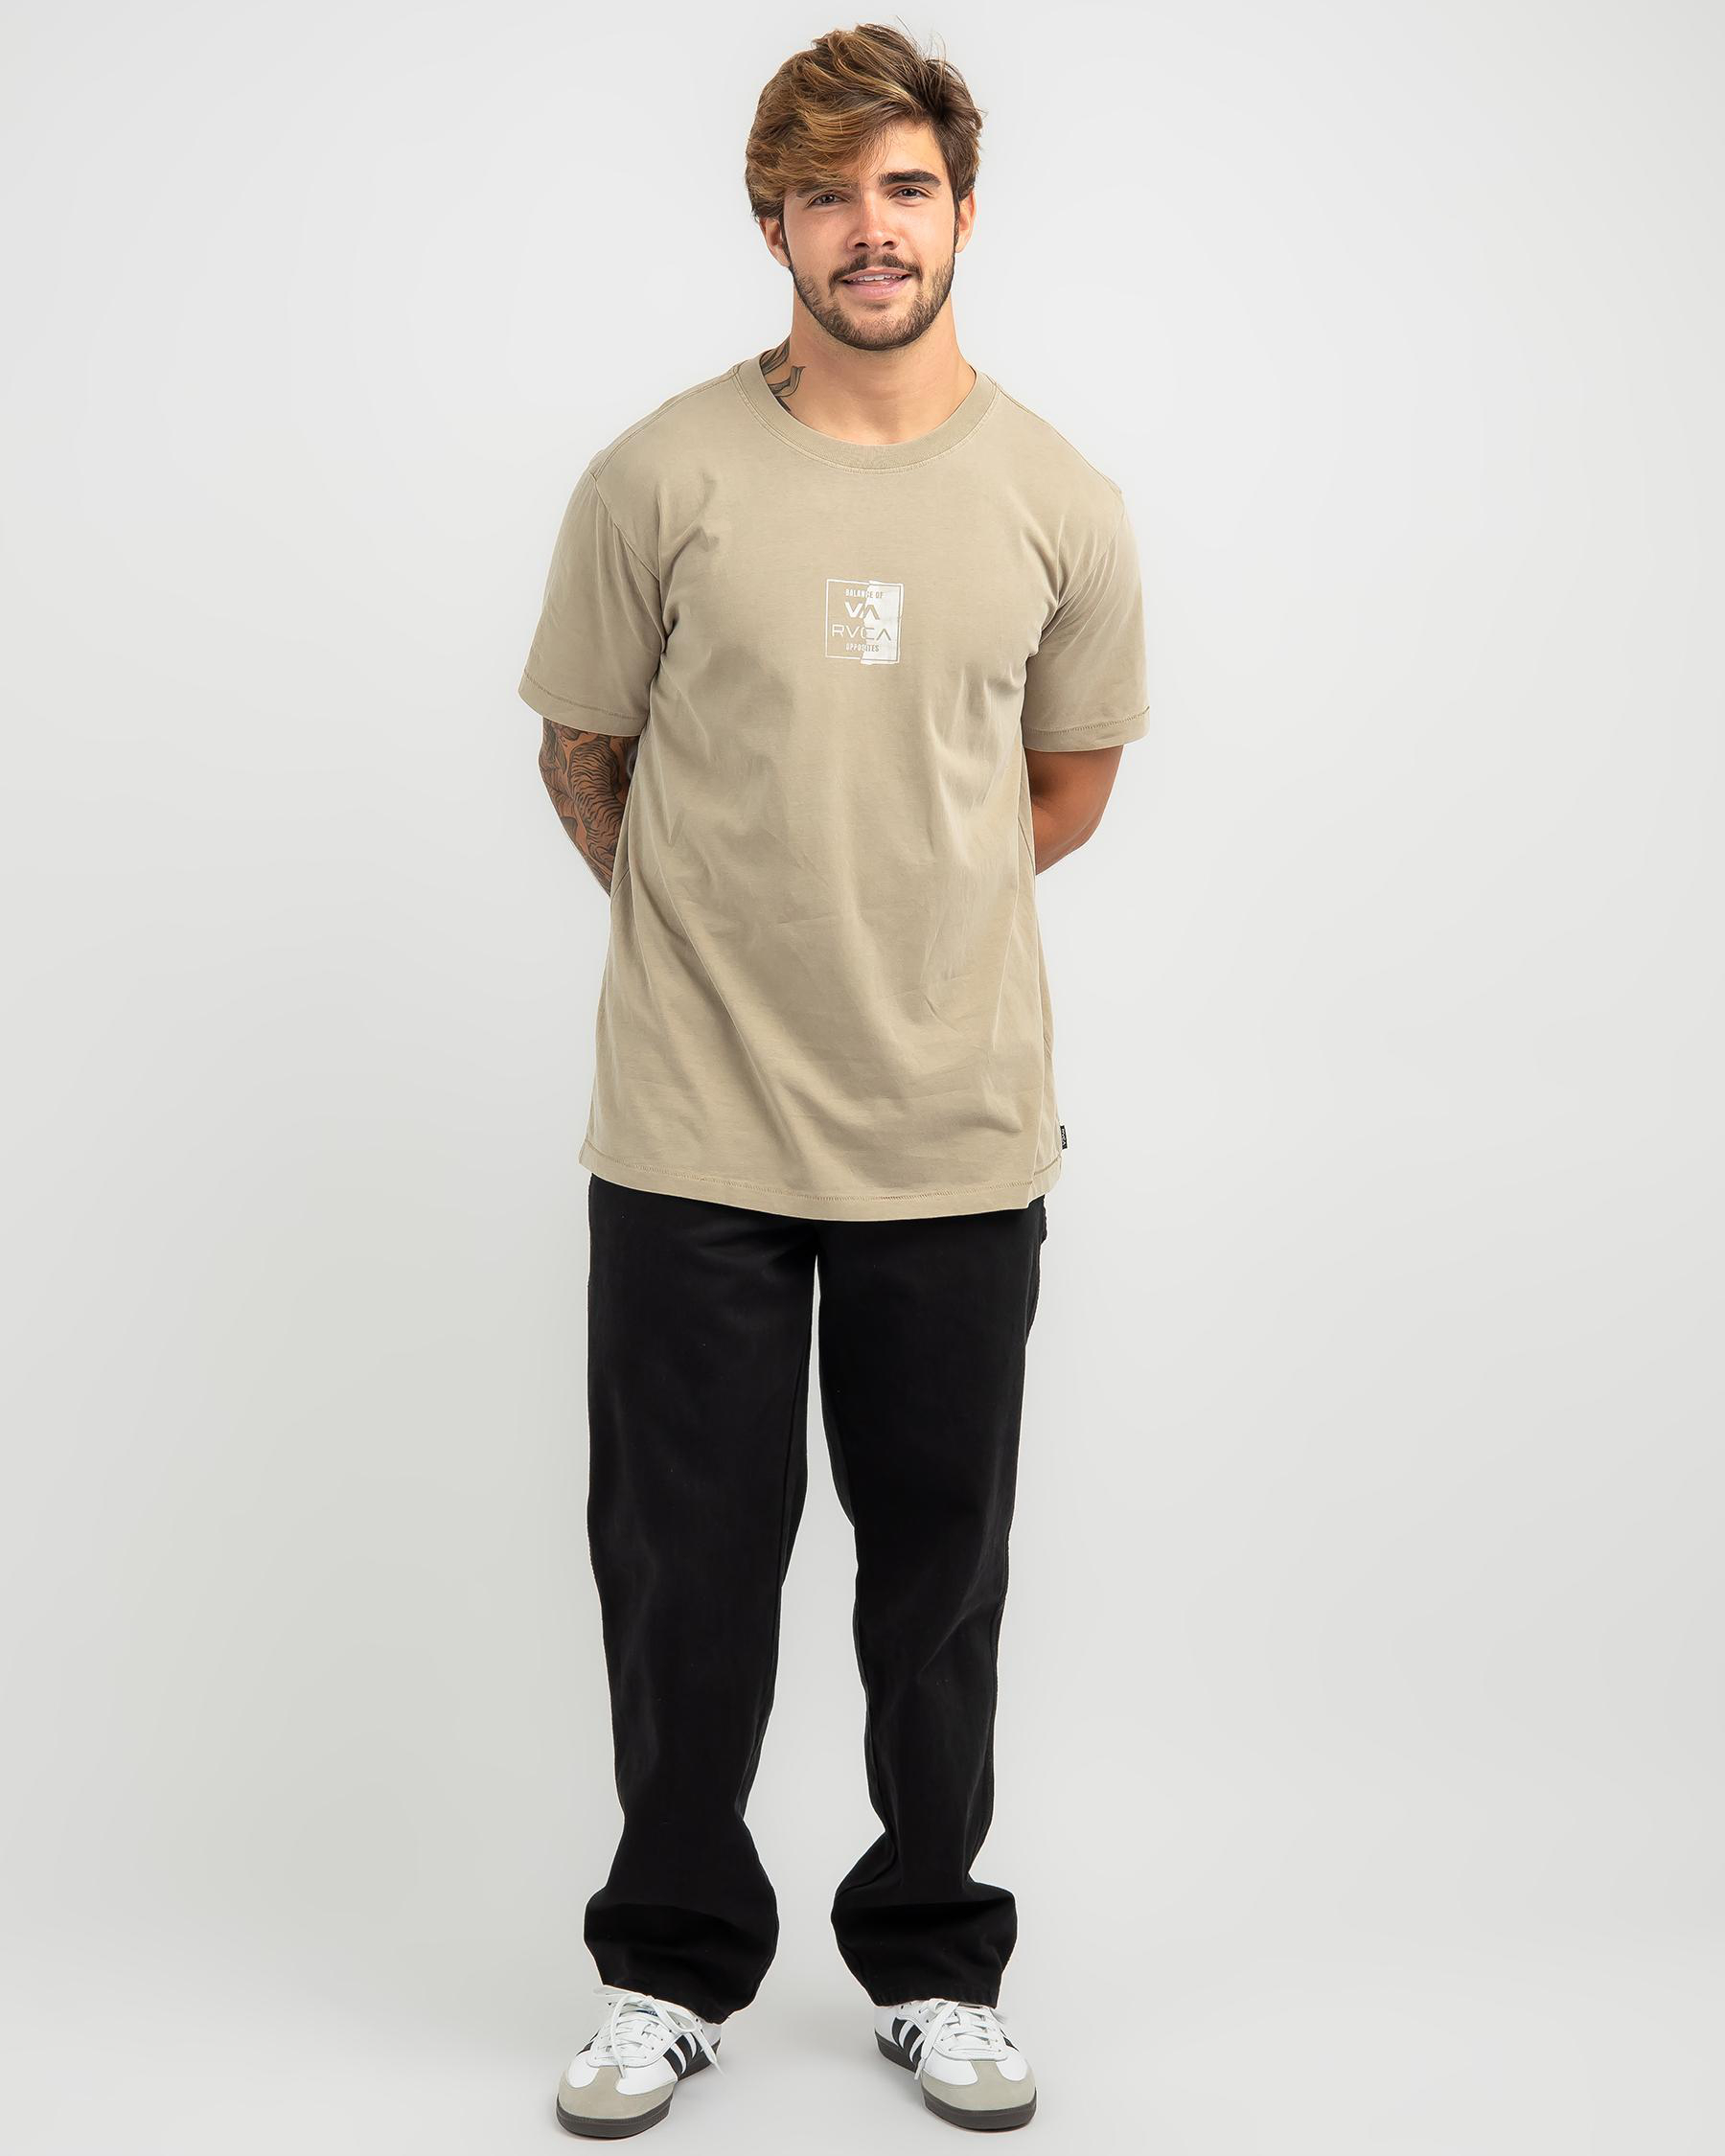 RVCA VA Torn T-Shirt In Timber - Fast Shipping & Easy Returns - City ...